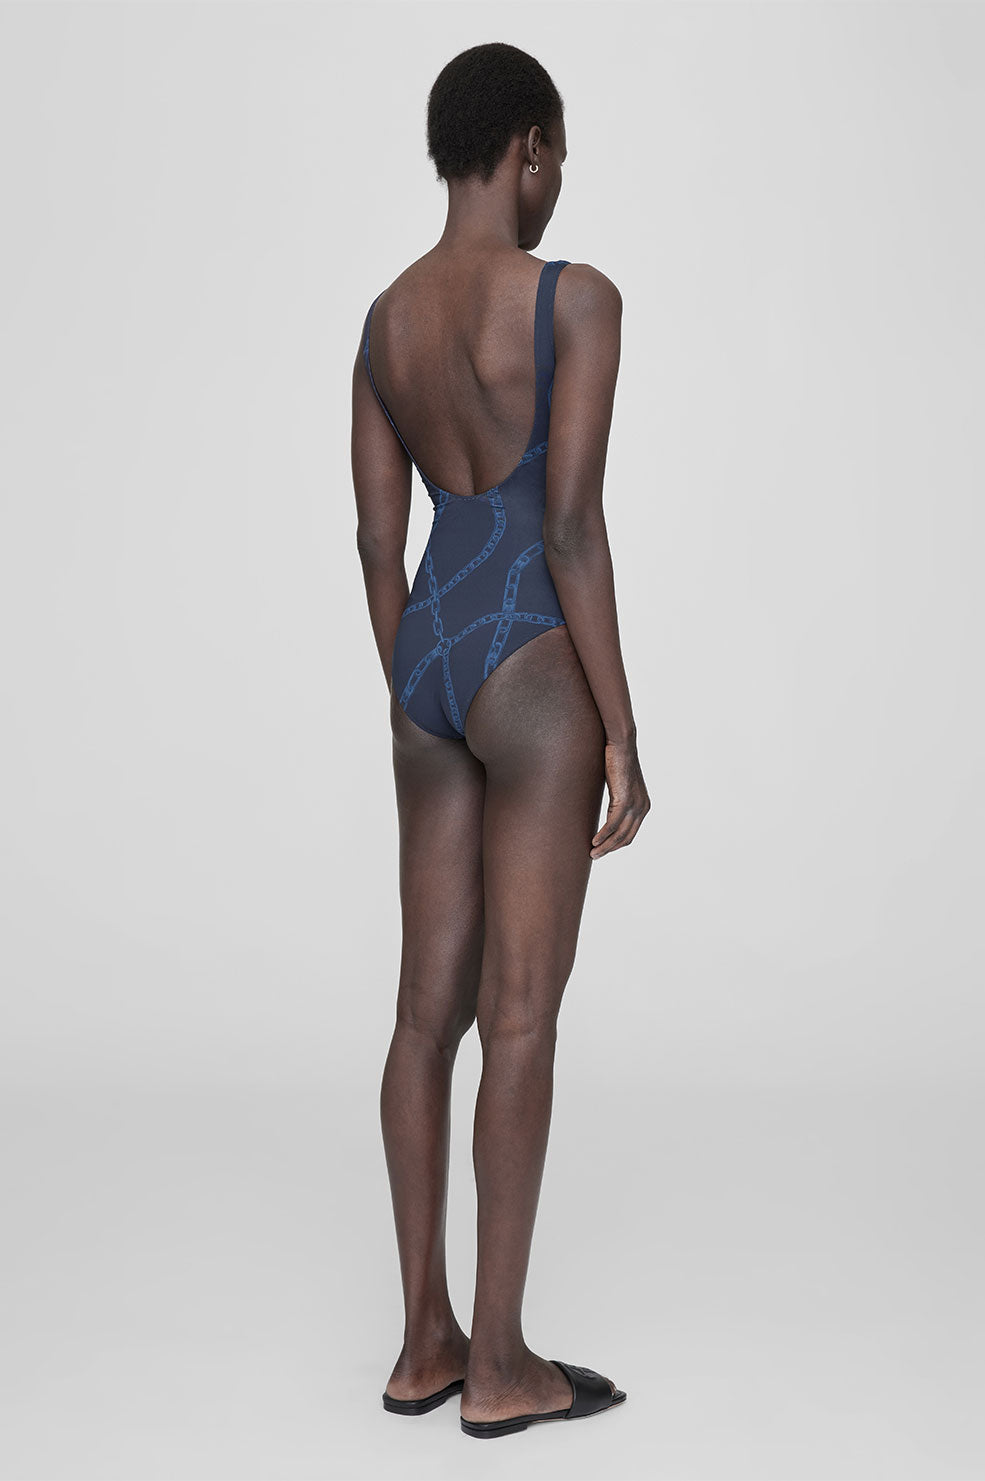 ANINE BING Jace One Piece - Navy Link Print - Back View Model